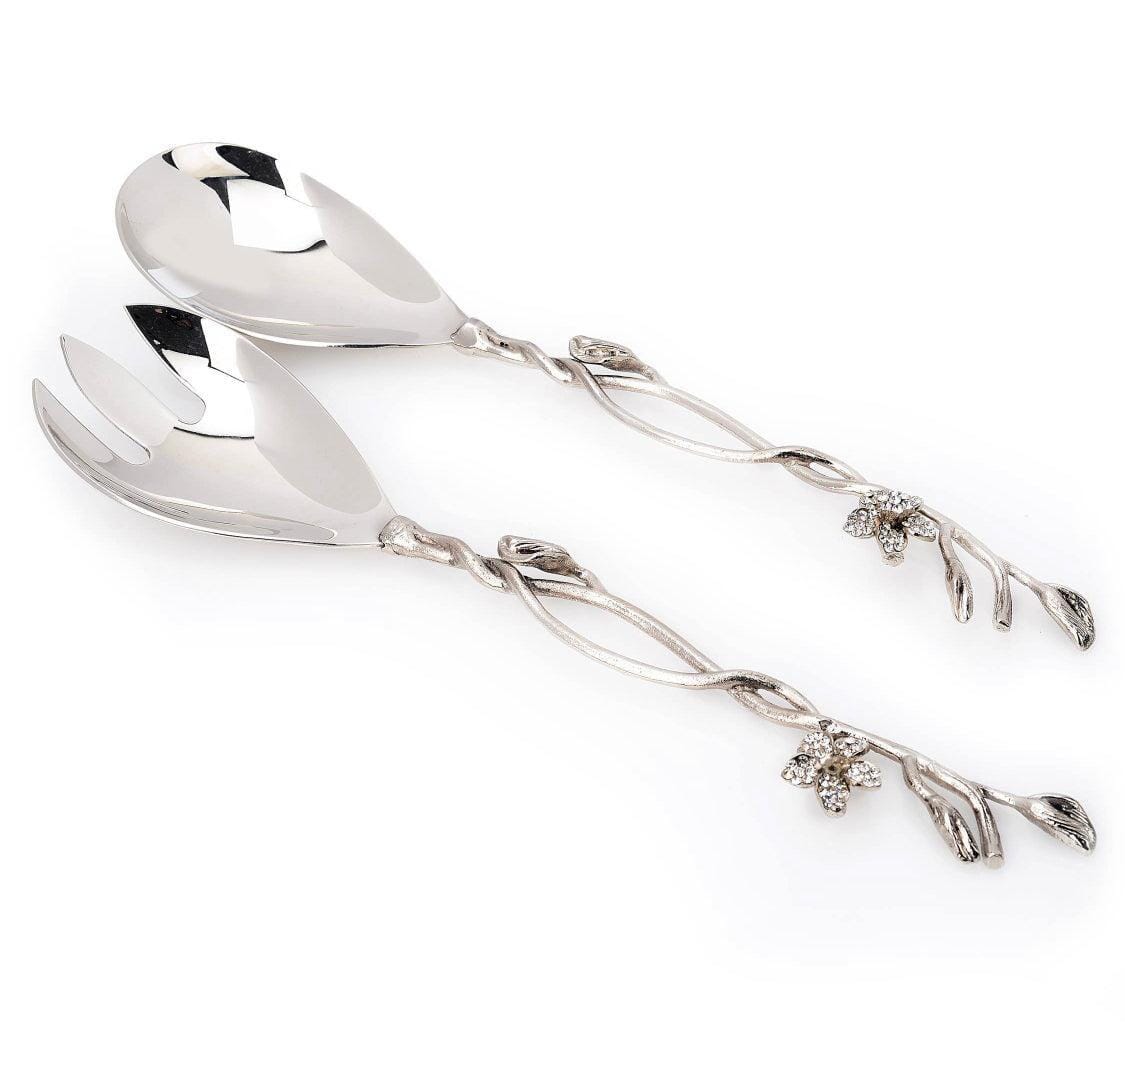 Salad Servers With Jeweled Flower Salad server set High Class Touch - Home Decor 